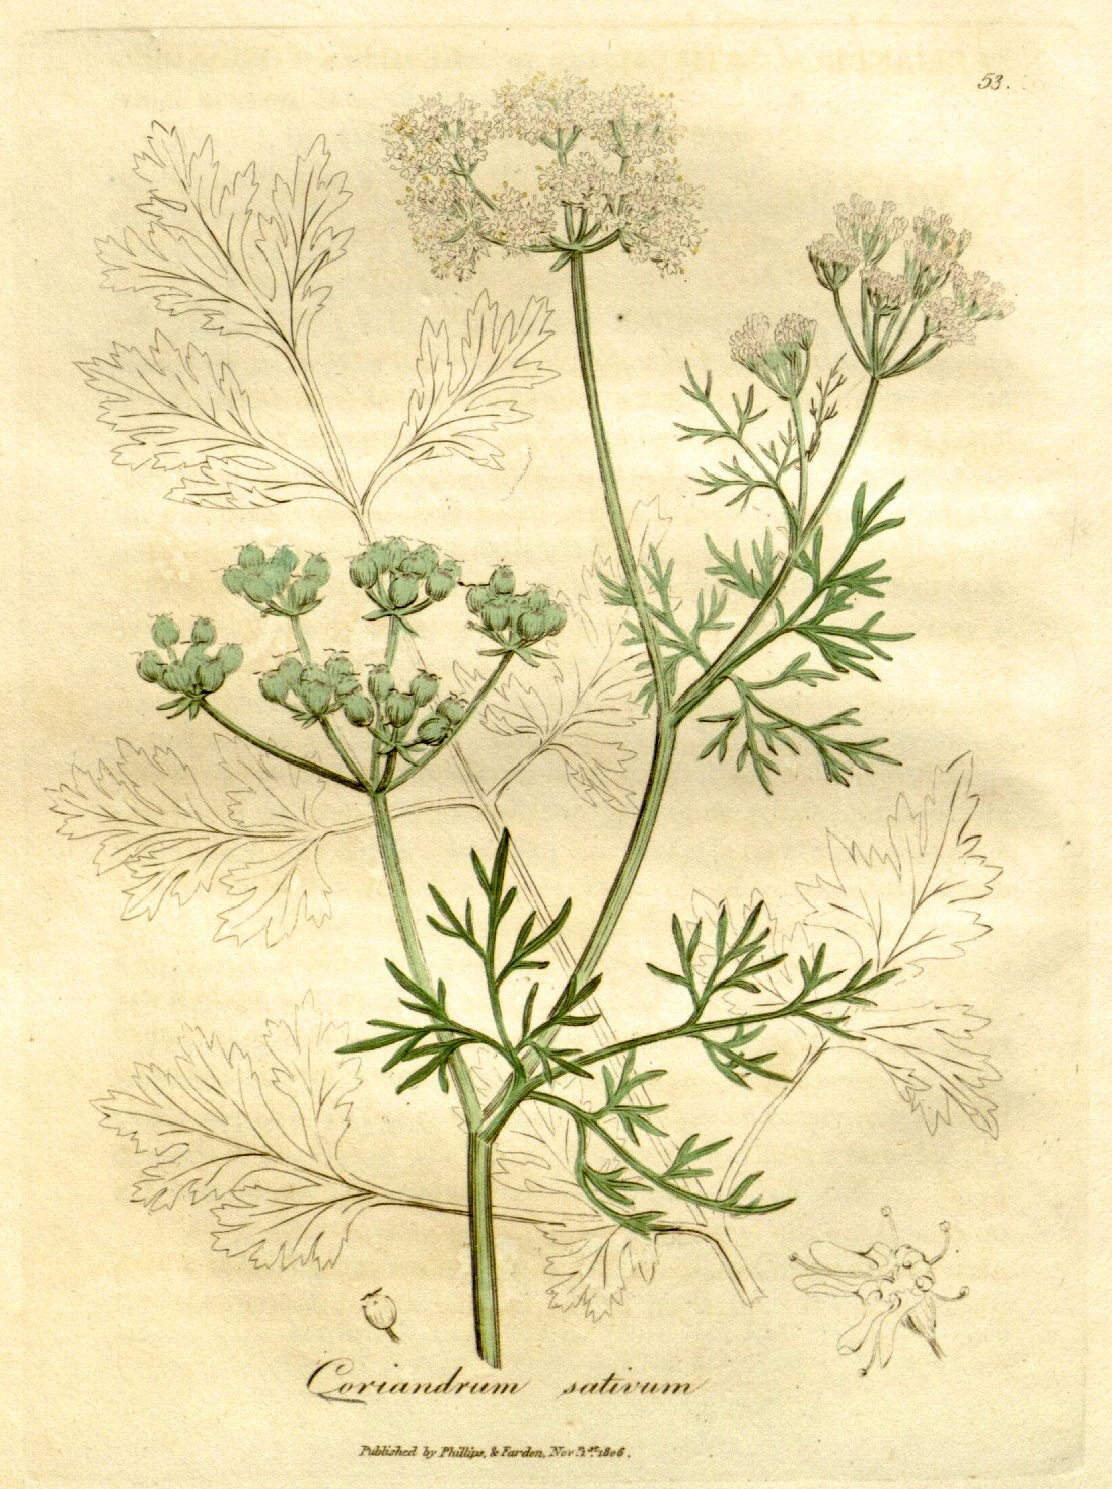 Biodiversity Heritage Library for Europe: Spice of the week: Coriander